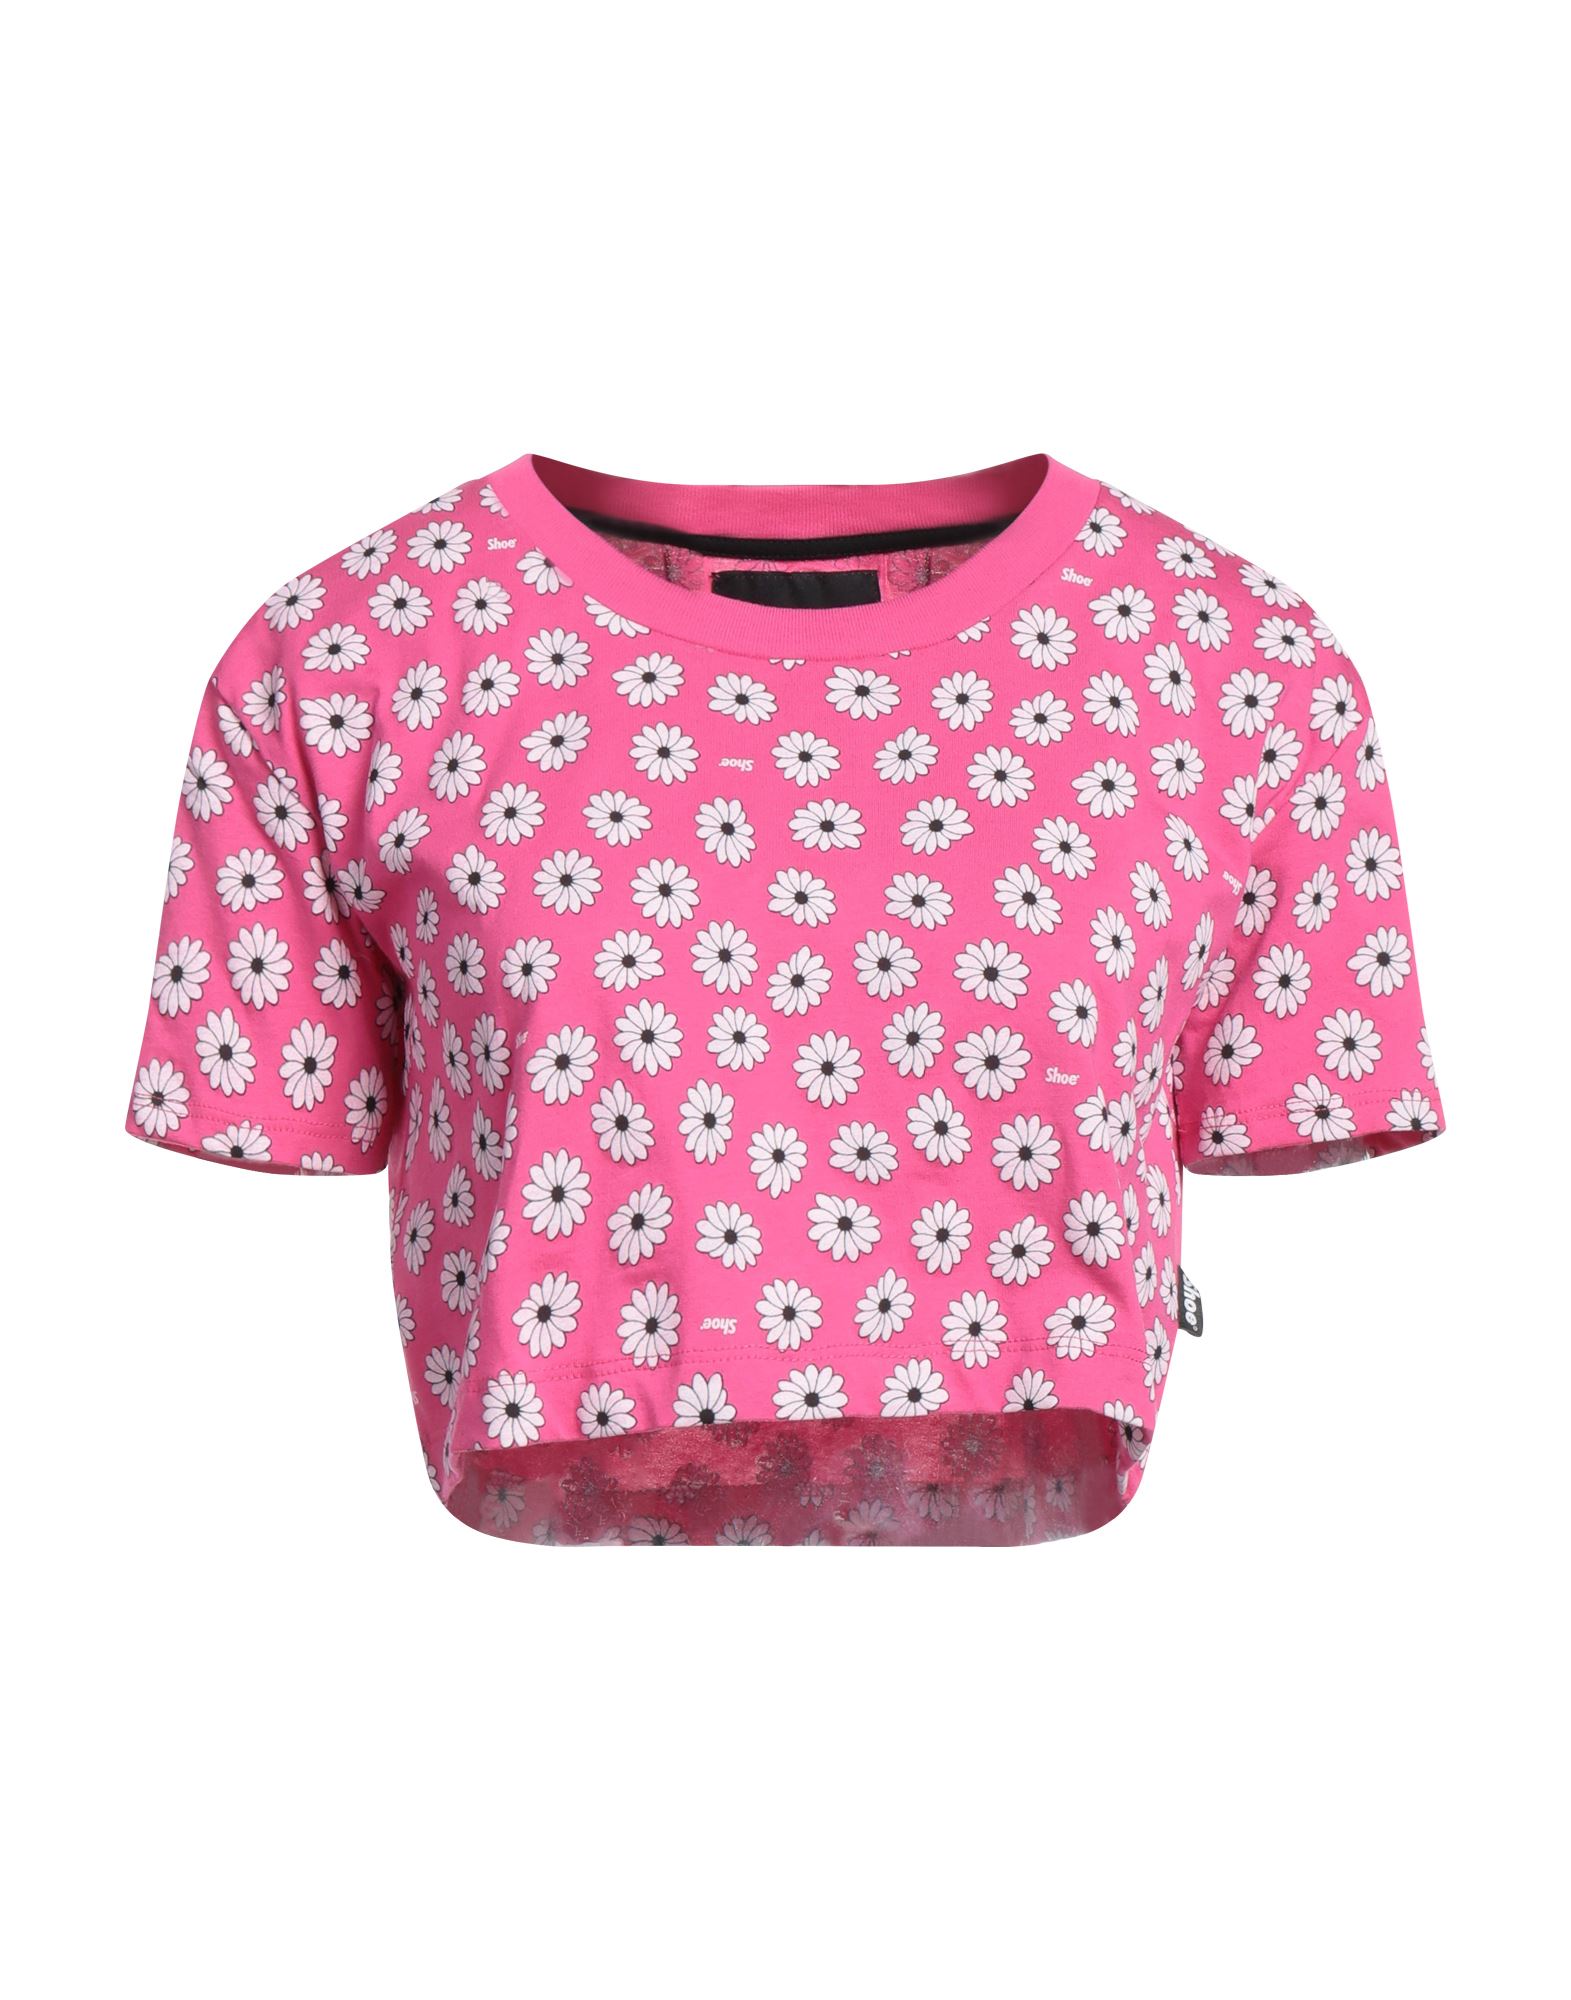 Shoe® T-shirts In Pink